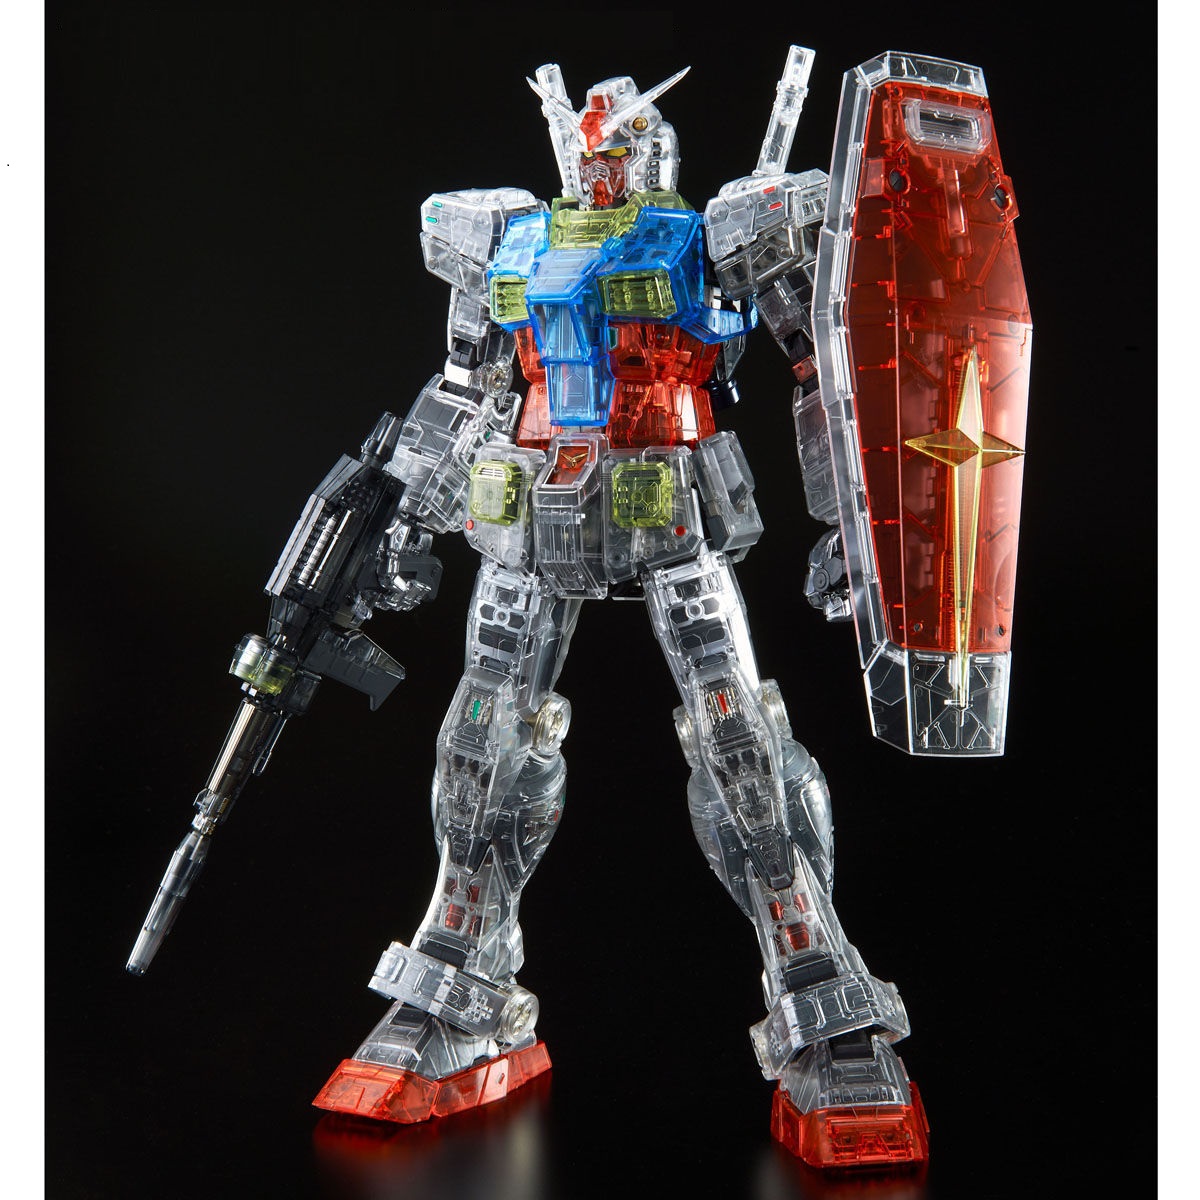 Pg Unleashed 1 60 Clear Color Body For Rx 78 2 Gundam Gundam Premium Bandai Usa Online Store For Action Figures Model Kits Toys And More